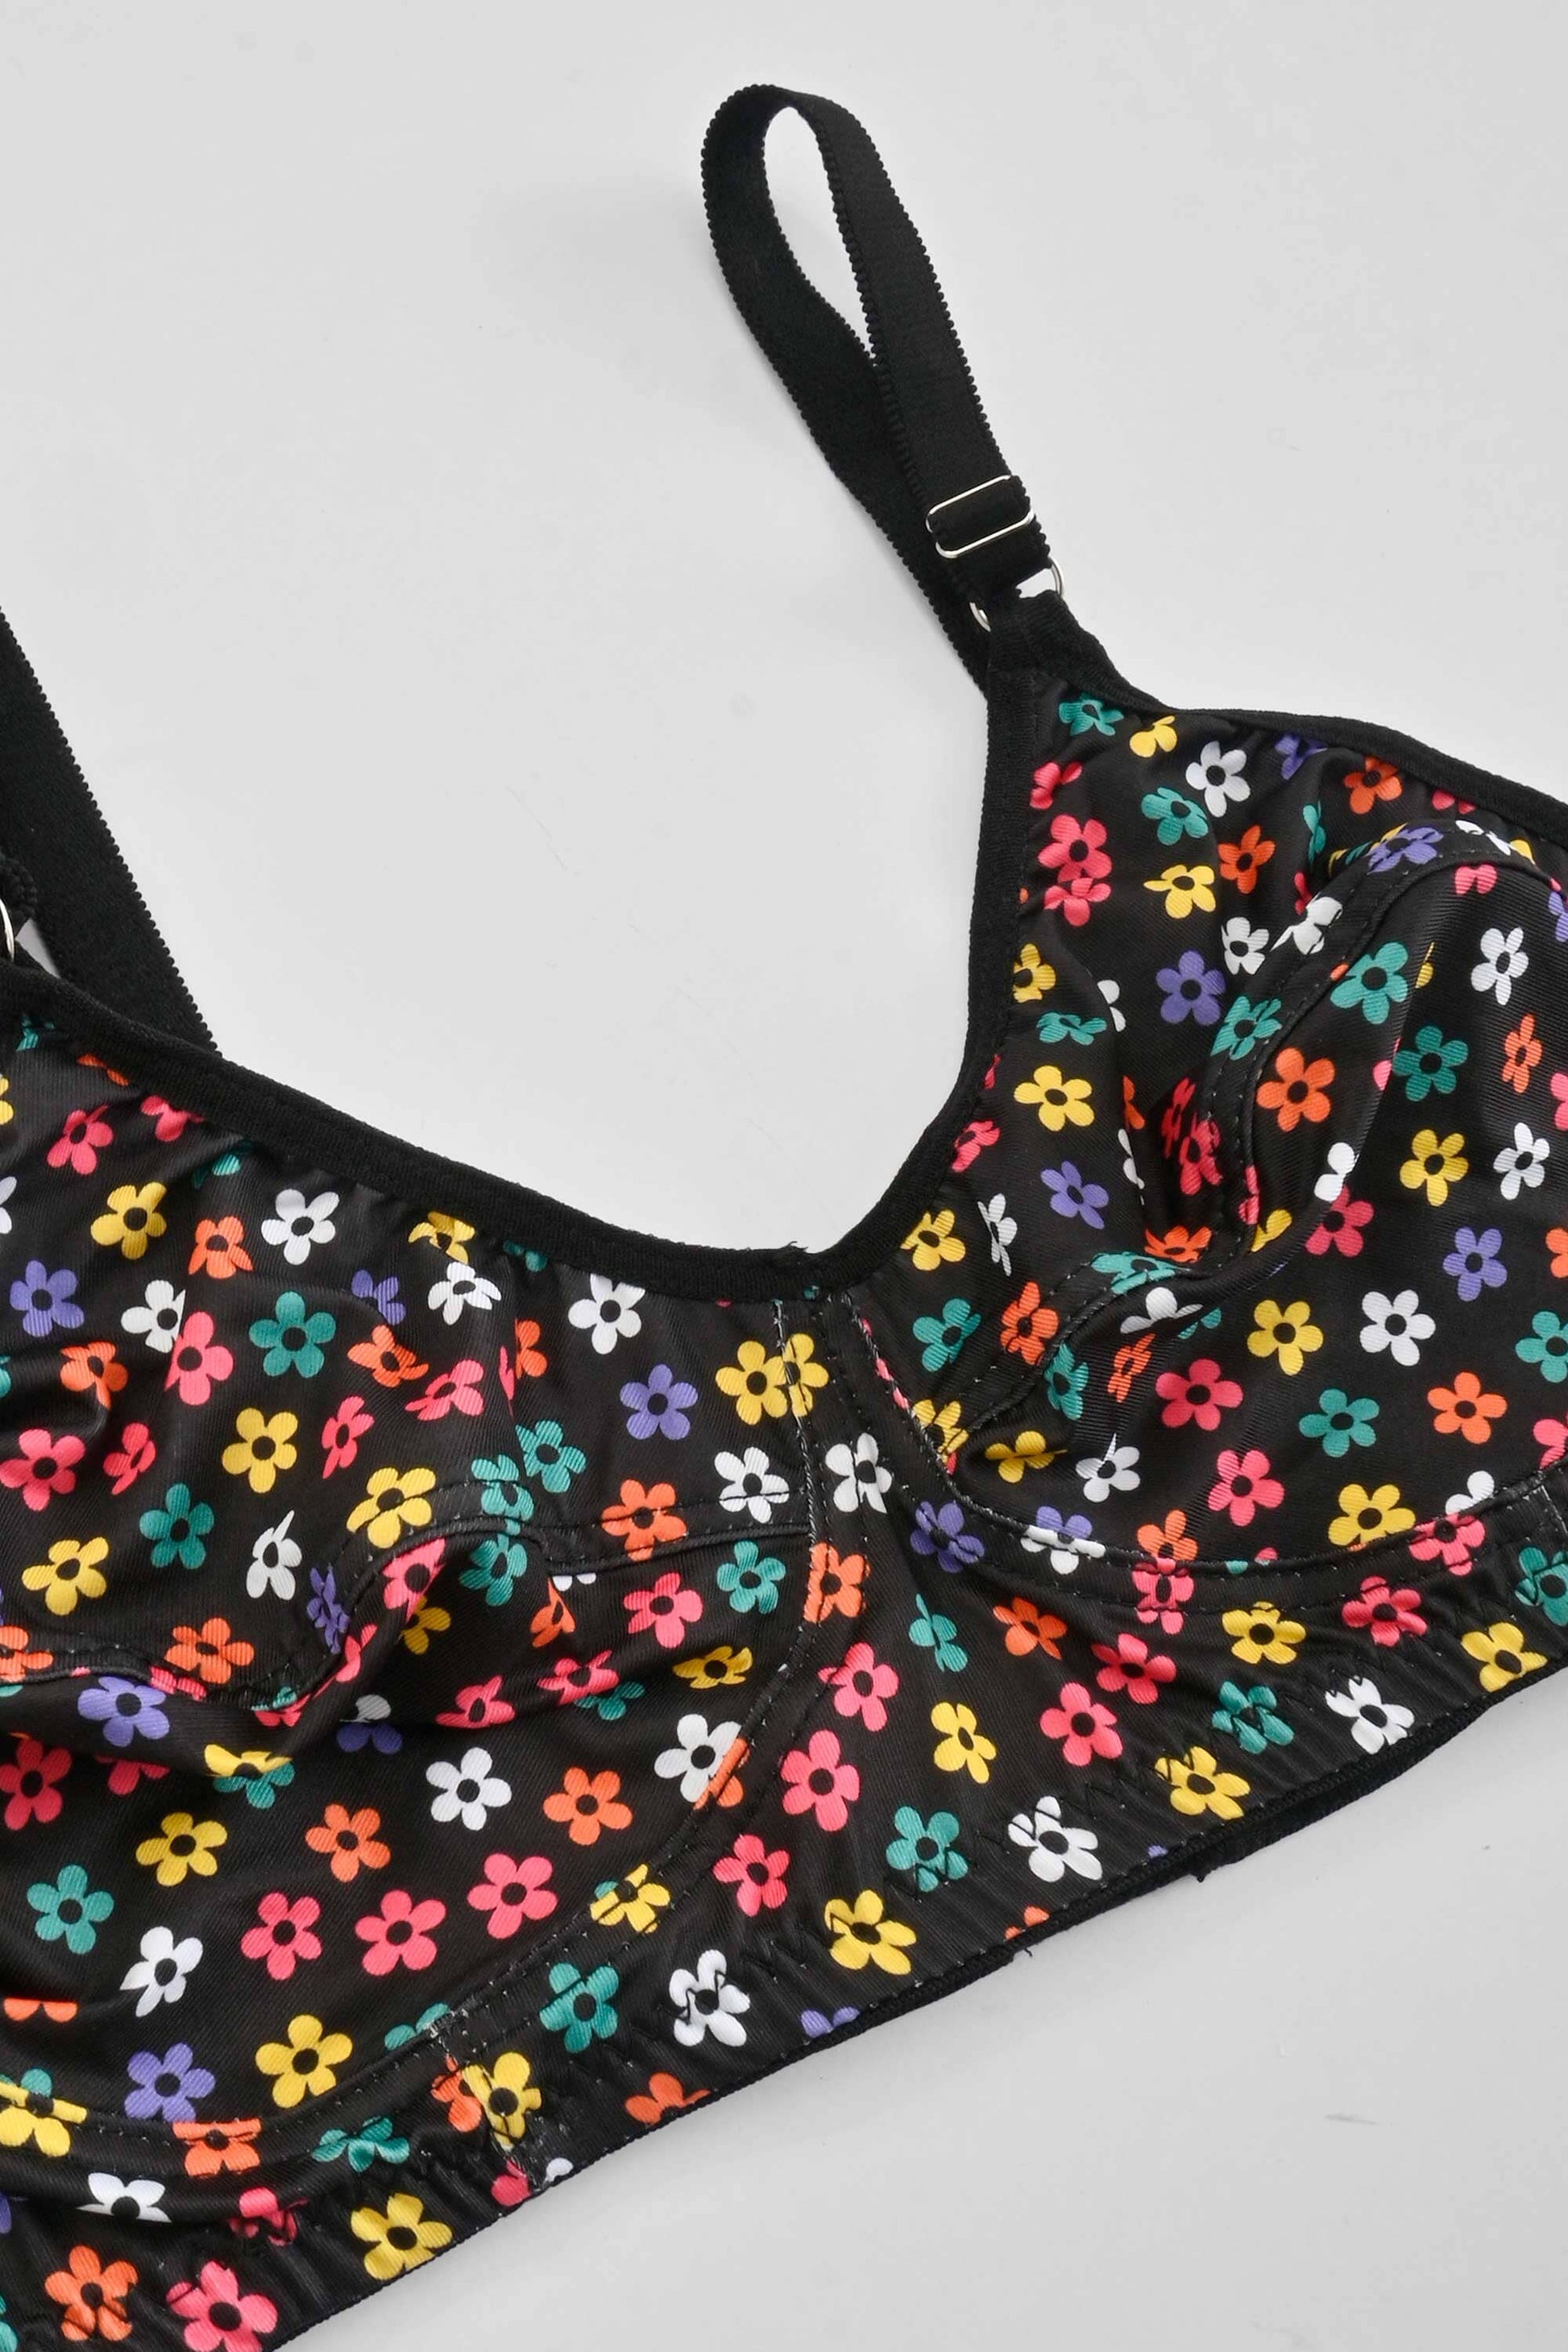 Women's Floral Printed Stretched Comfort Bra